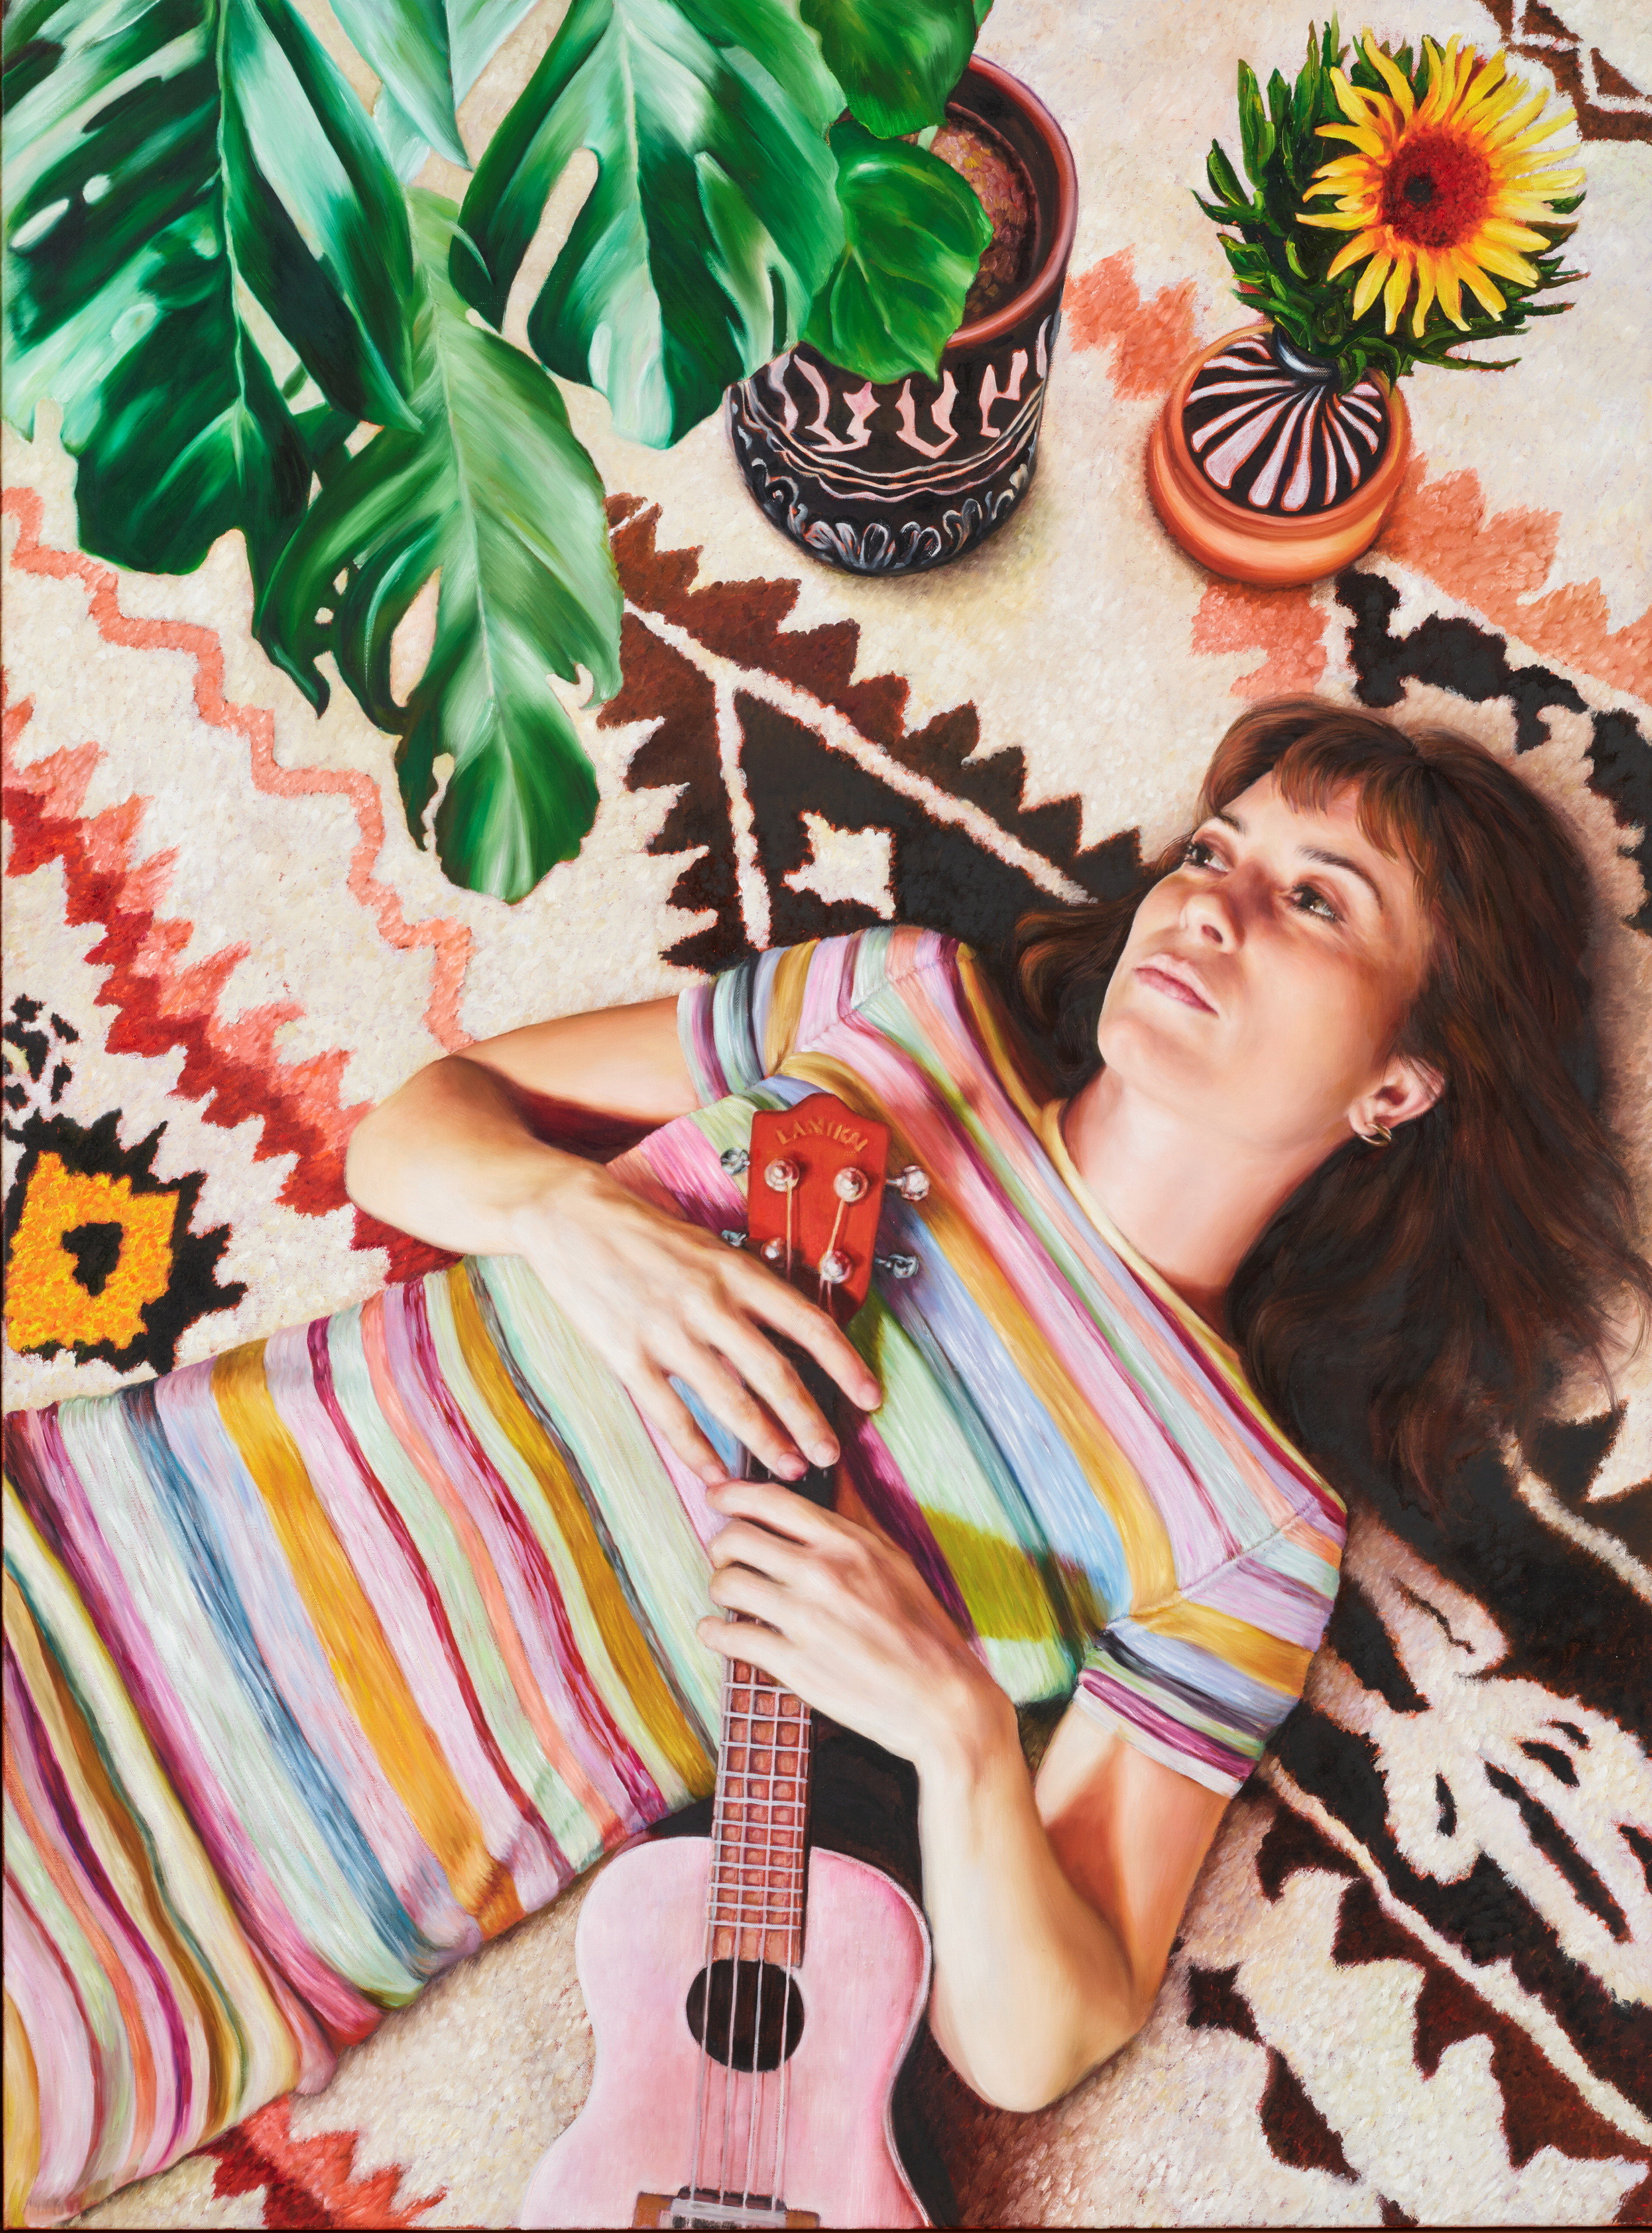 A portrait of Missy Higgins, a white brunette woman in a striped dress, lying down and holding a ukelele.